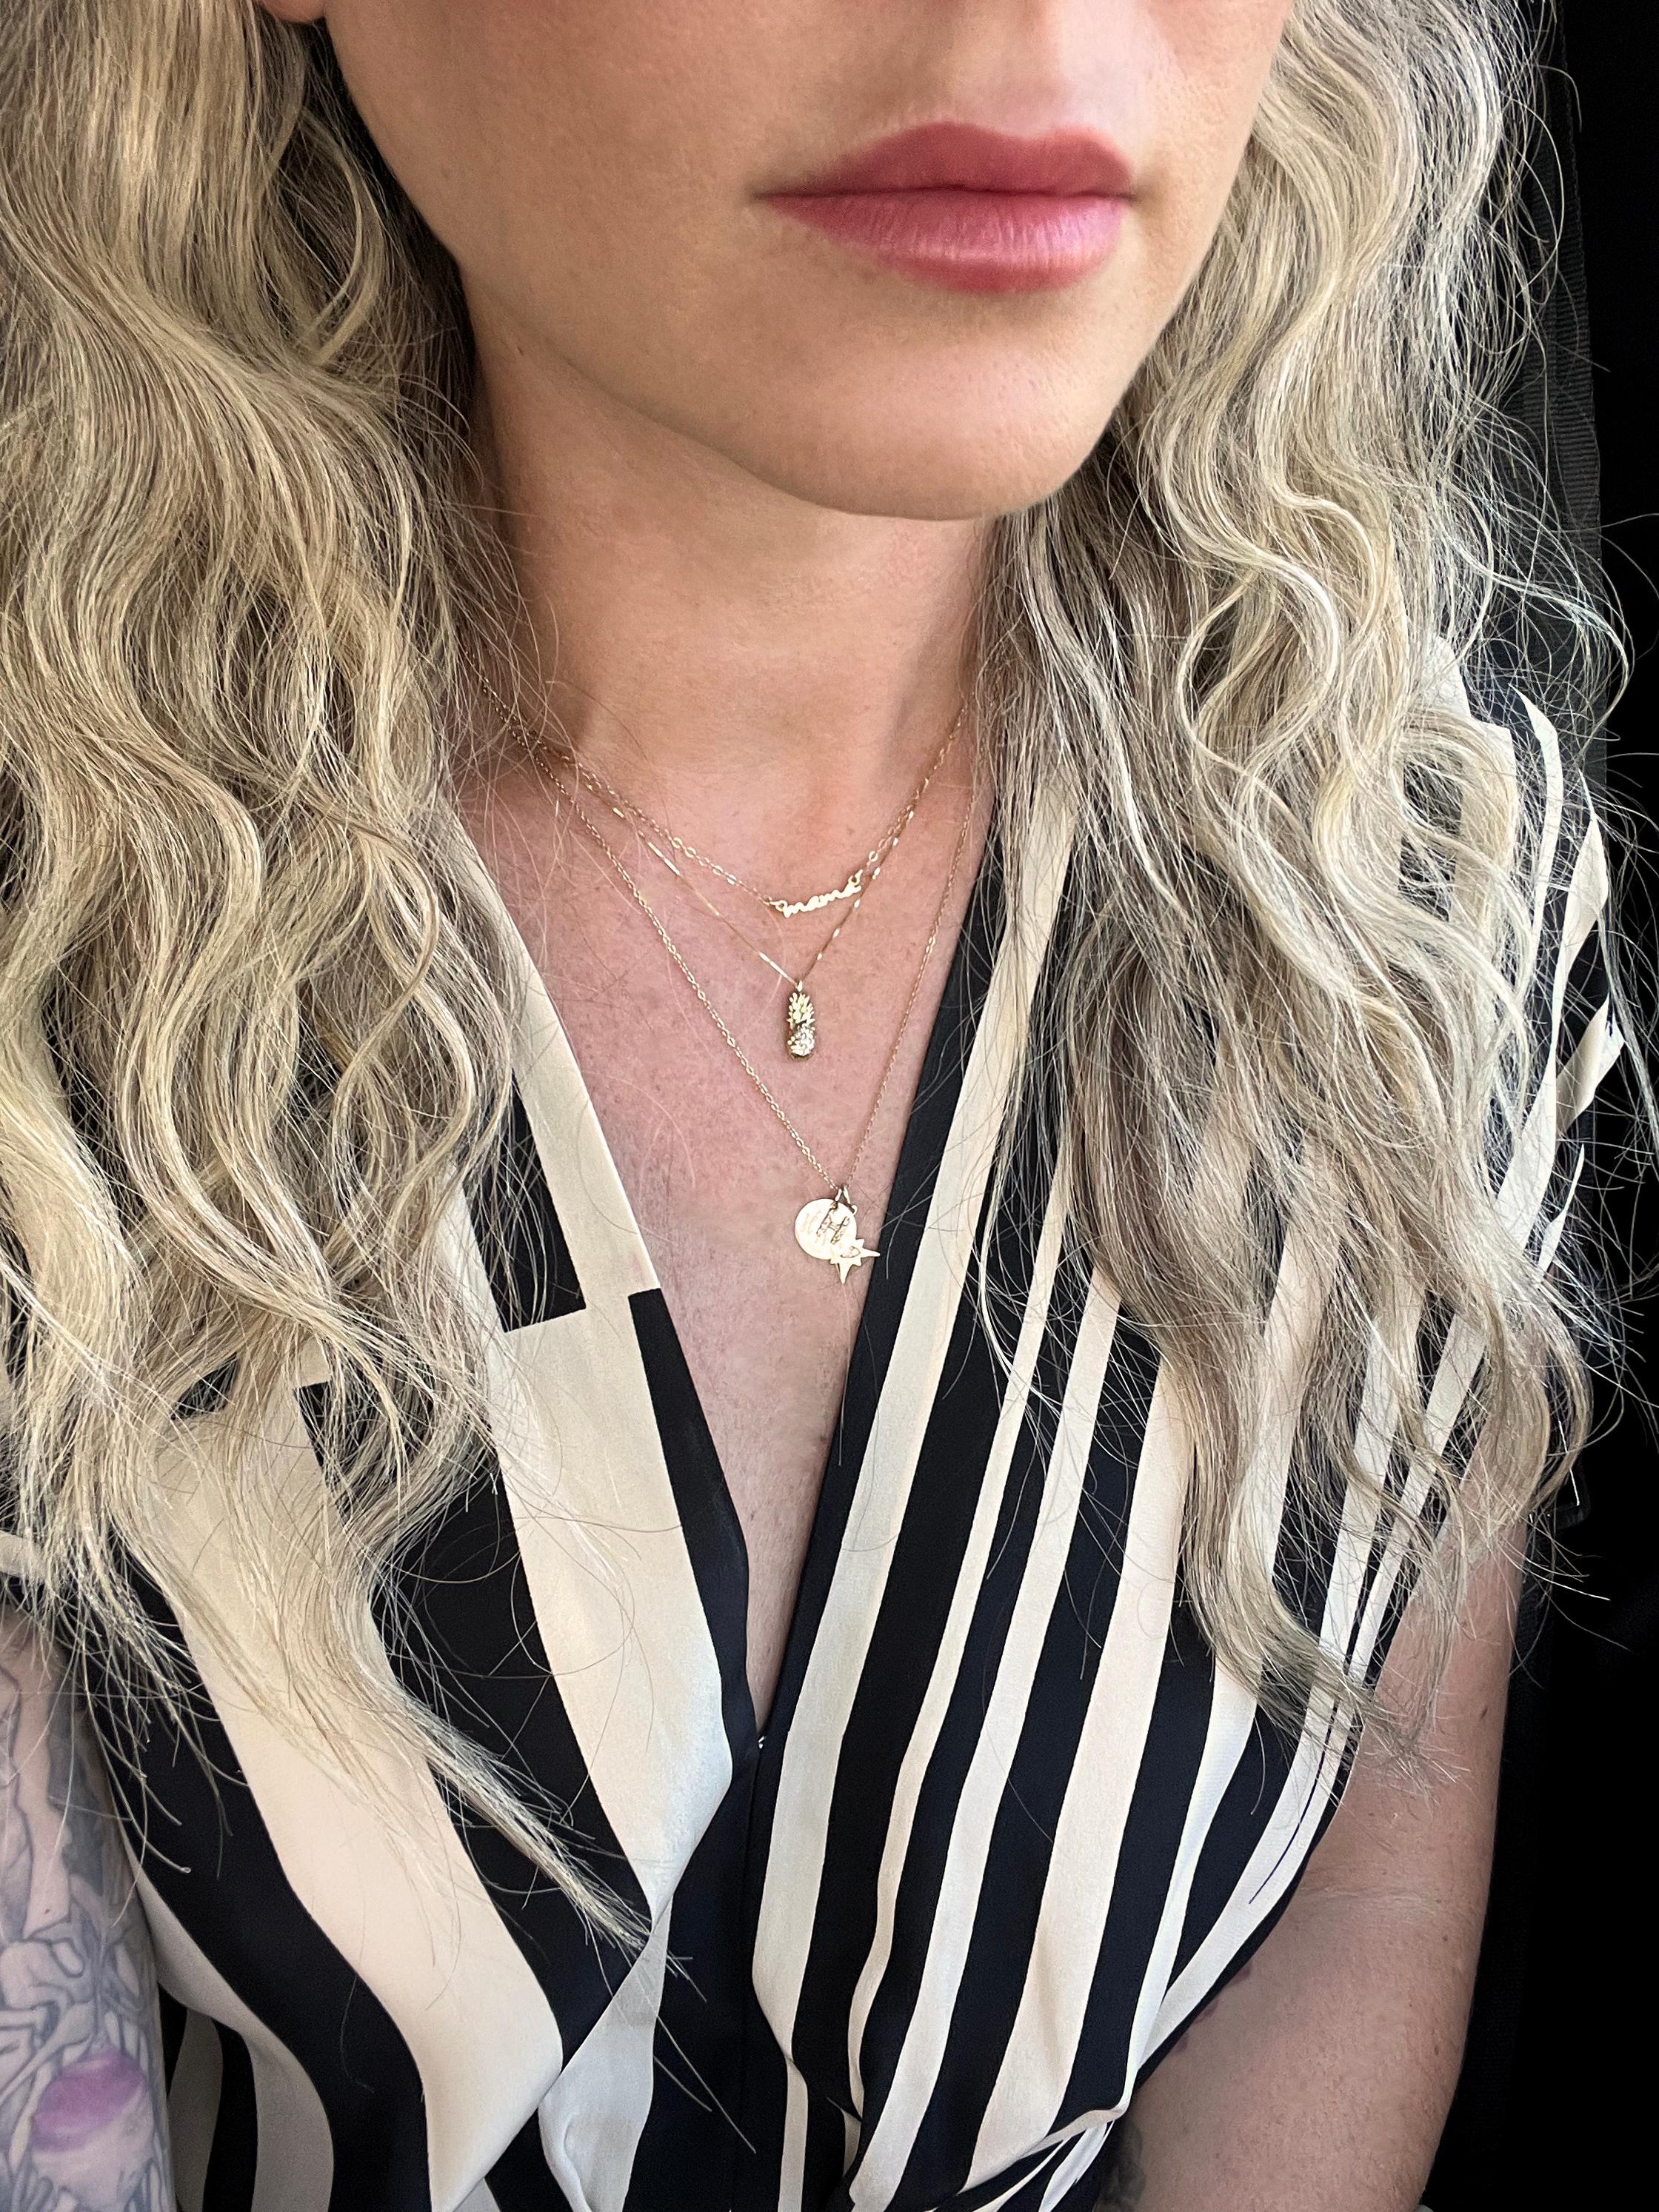 These necklaces express 3 of the most important things in life:  Mama, Love, and Inspiration.  Wear around your neck to remember these things every day, or gift one to just about anyone...We cast this original word necklace from the exact cursive